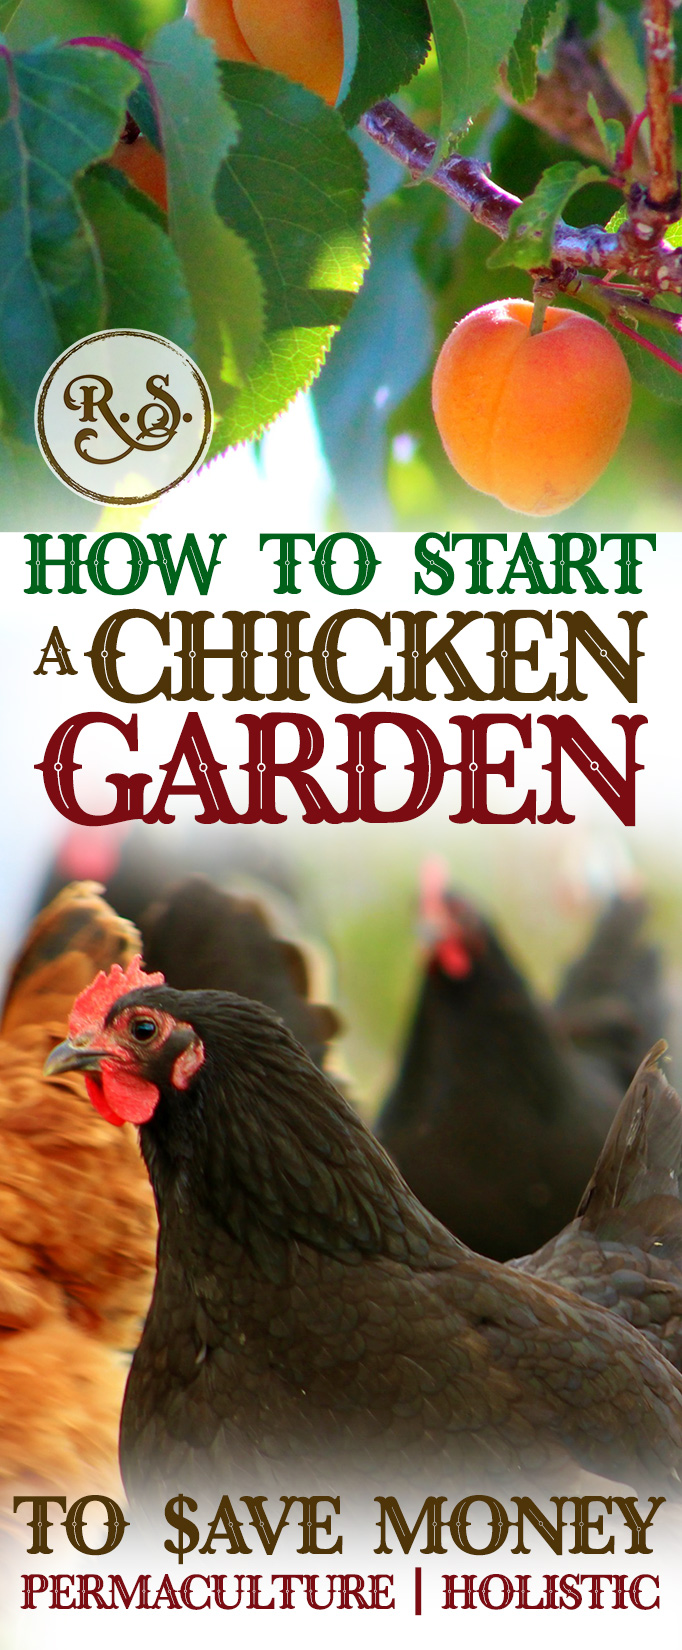 Learn how to grow a sustainable garden for your backyard chickens to save money on their feed bill. Plant shrubs, trees & herbs for a permaculture homestead. Great DIY ideas for beginners & beyond.